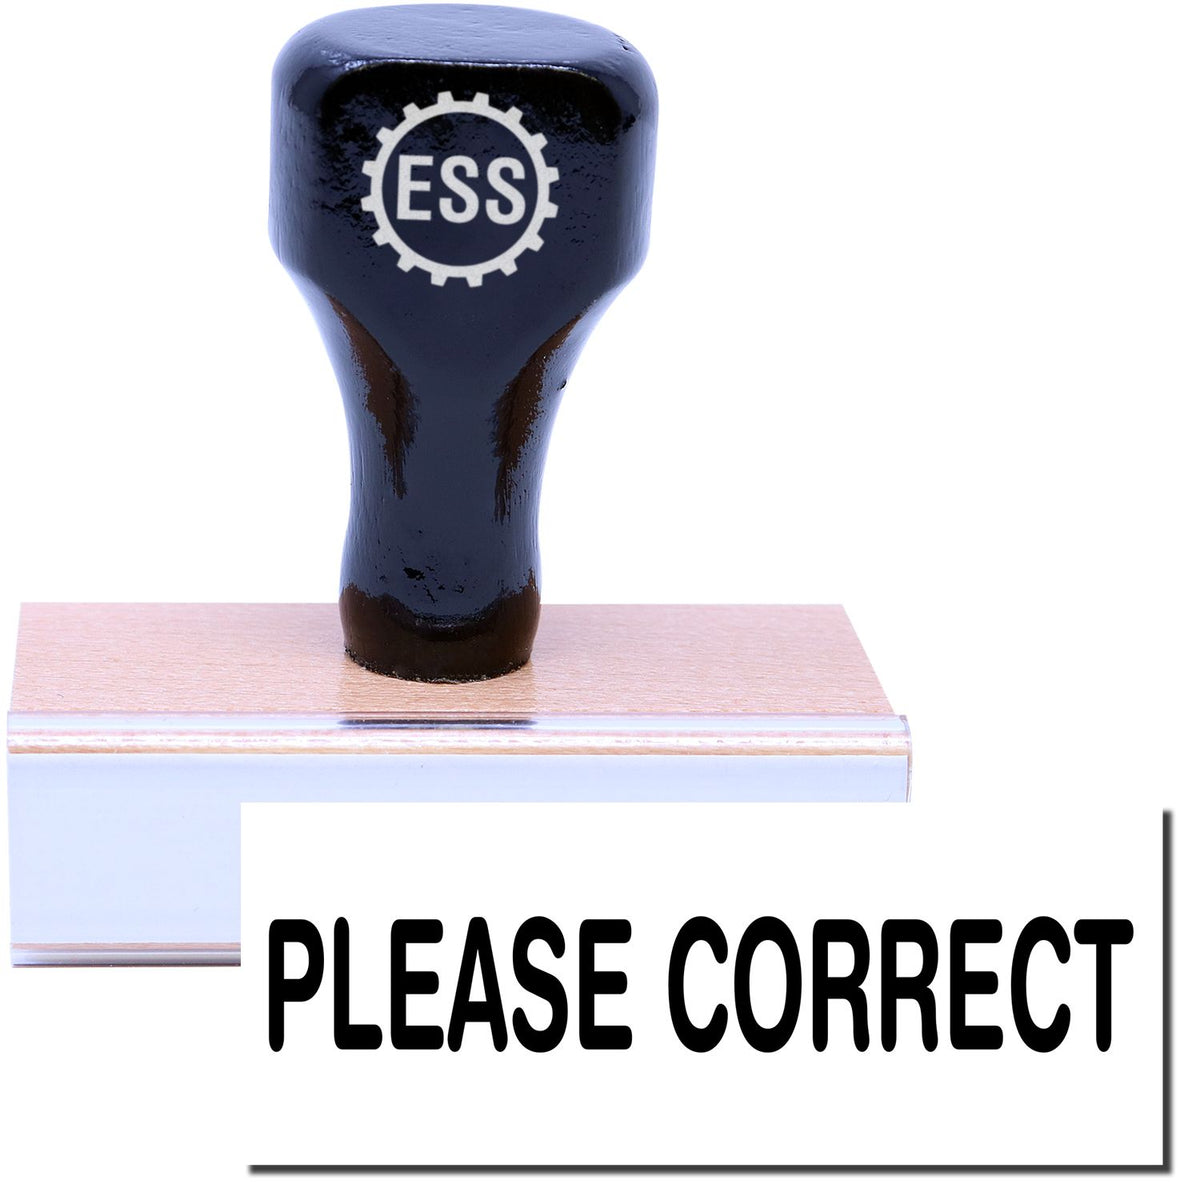 A stock office rubber stamp with a stamped image showing how the text &quot;PLEASE CORRECT&quot; is displayed after stamping.